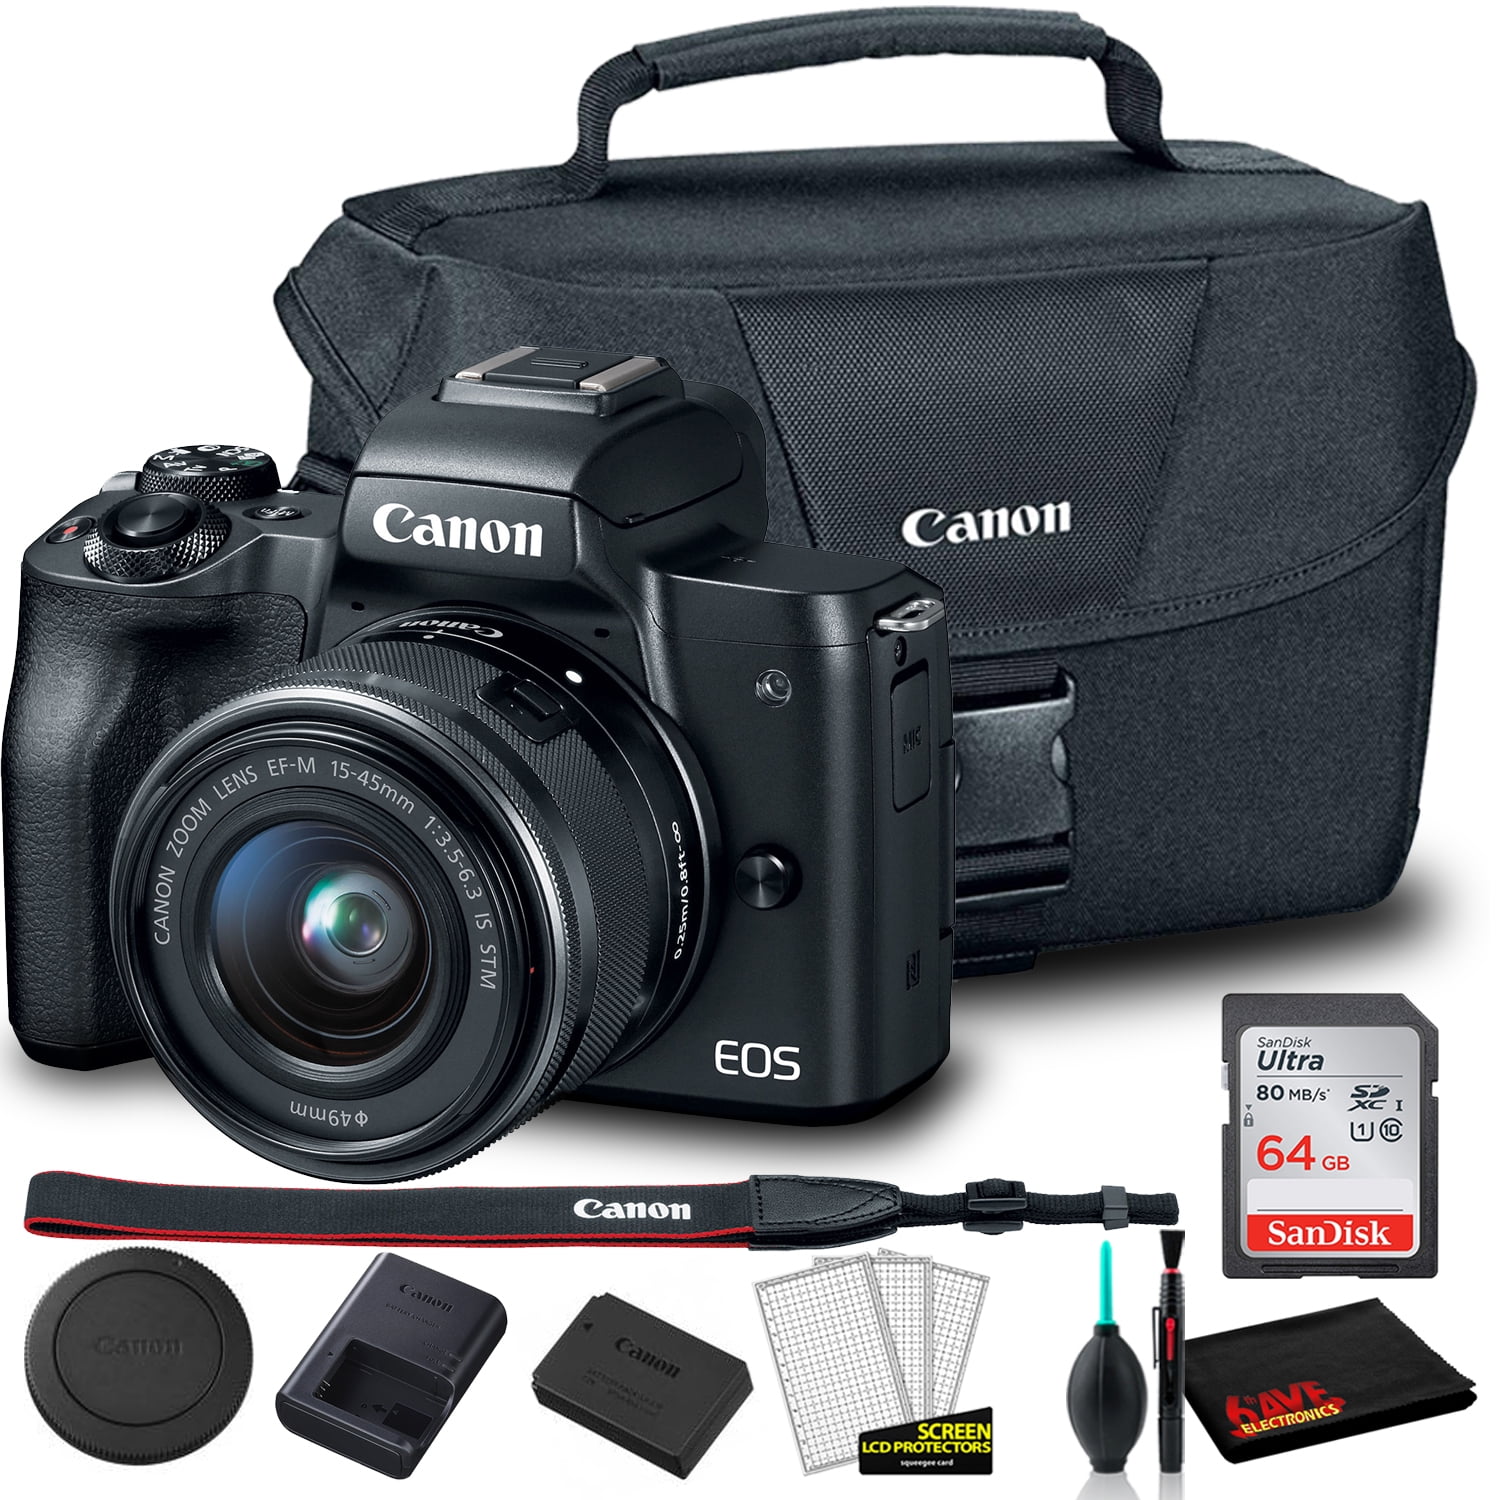 Canon EOS M50 Mirrorless Digital Camera with 15-45mm Lens (Black